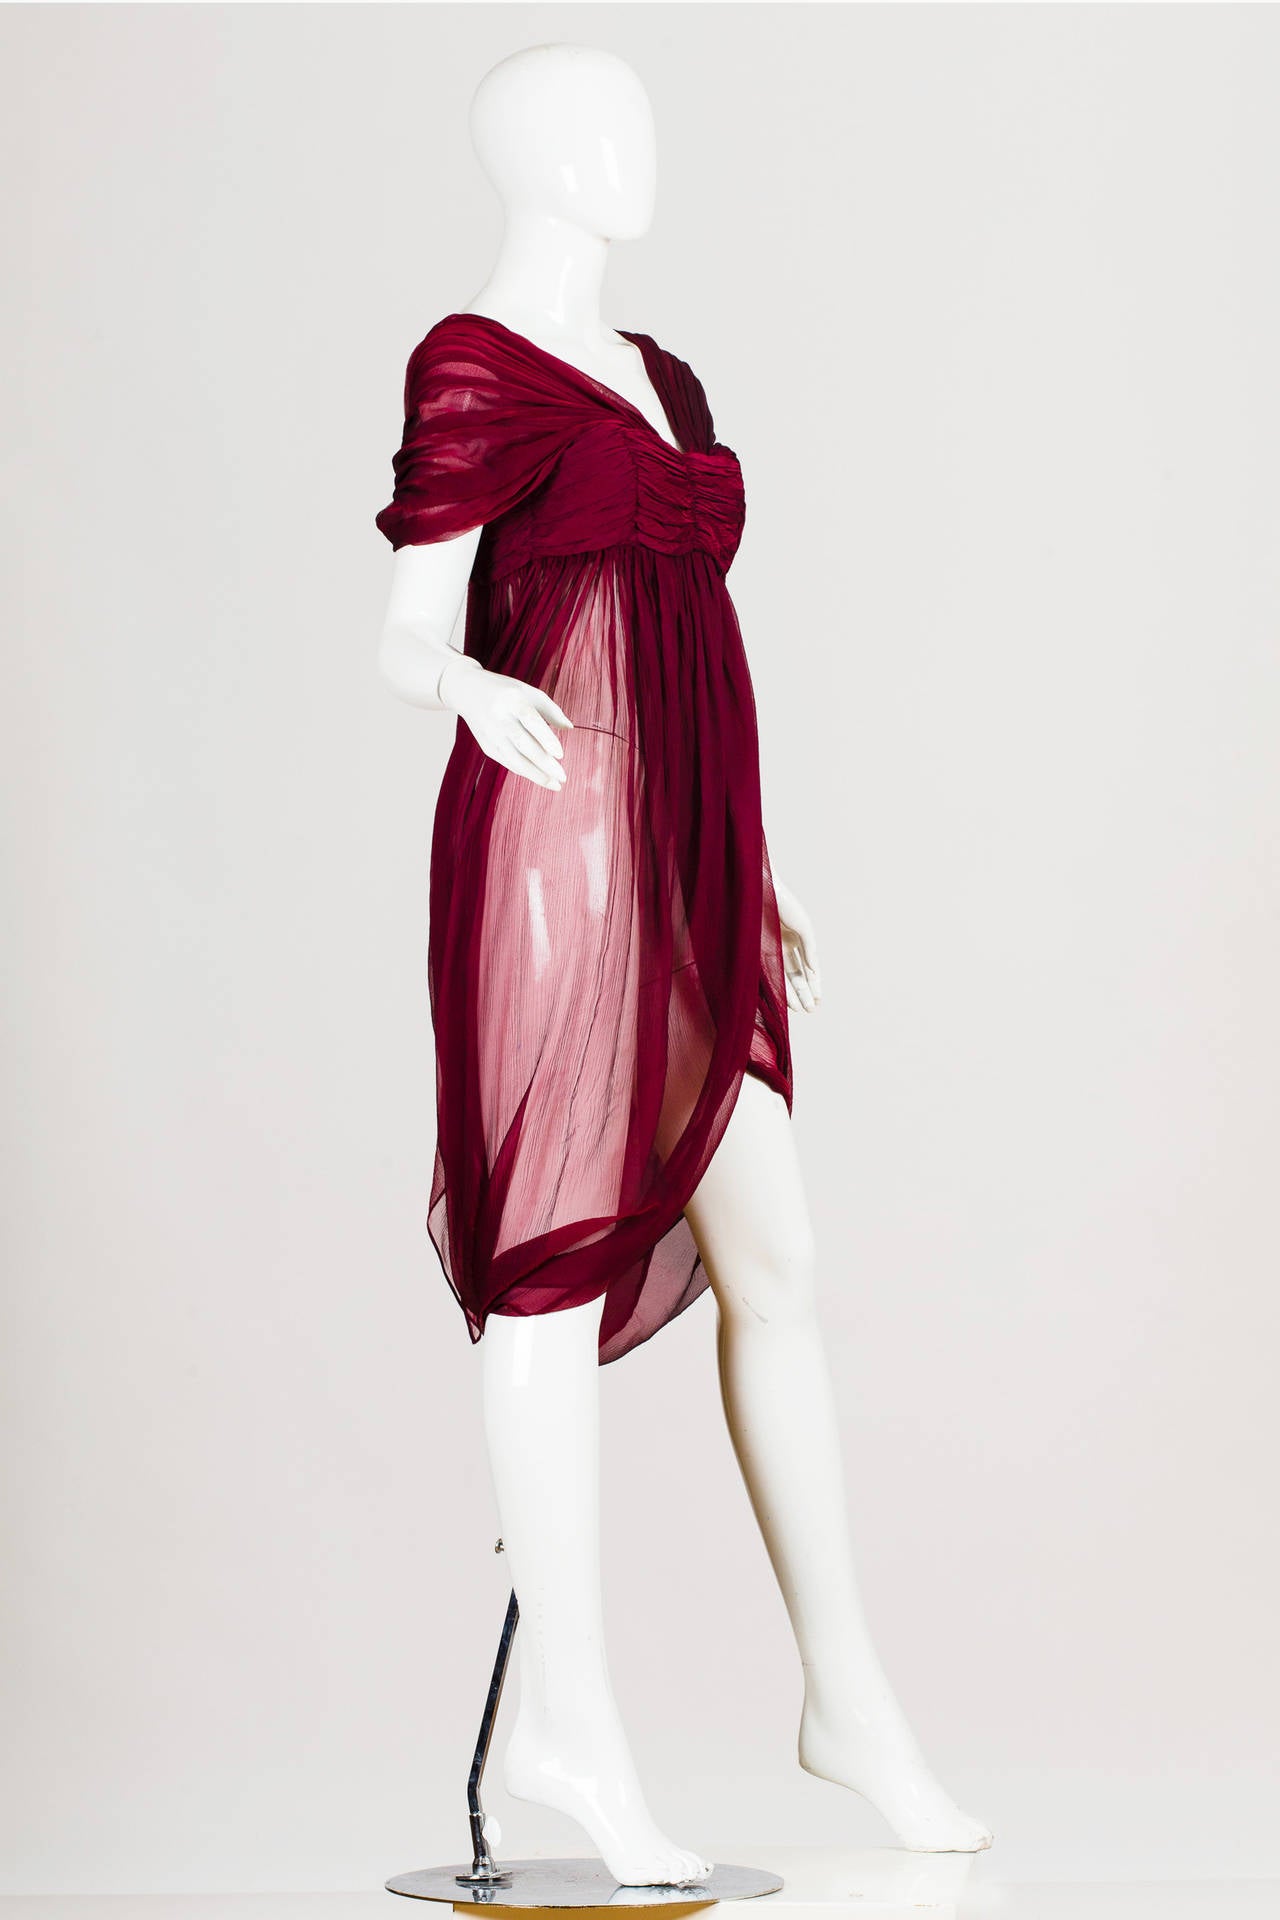 This piece is from Alexander McQueen's Autumn/Winter 08-09 collection, inspired from his recent trip to India. This deep ruby red dominated the collection paired only with black, white, and gold. His inspirational muse, in his fantasy, was a girl